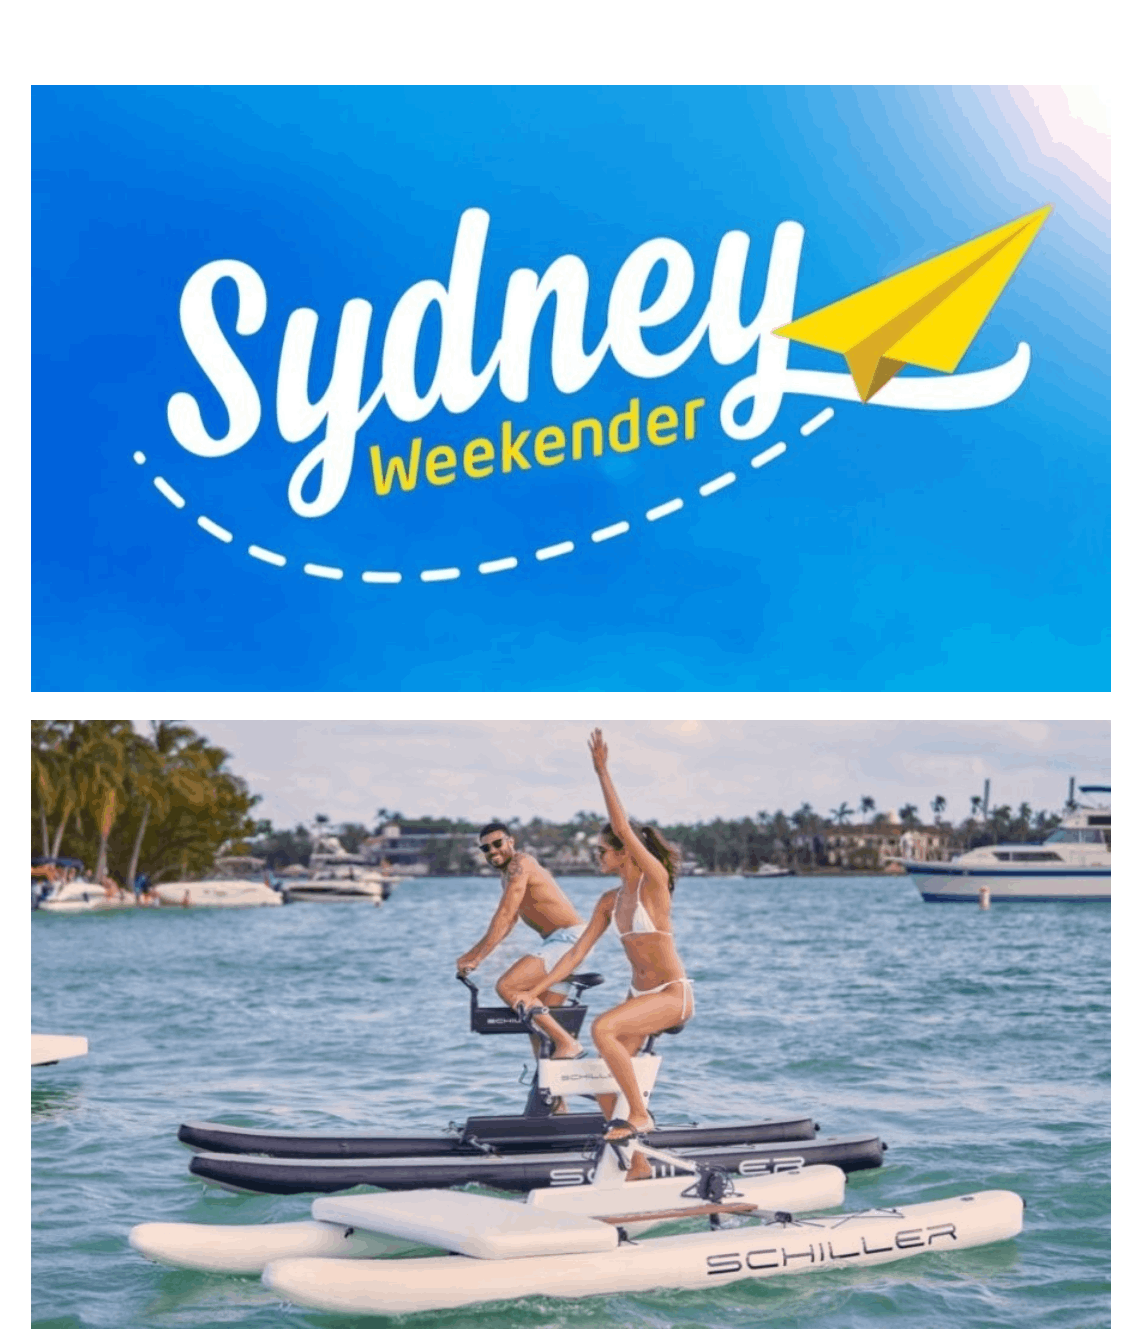 Sydney Weekender Shiller Water Bike Experience by Water Sports Central